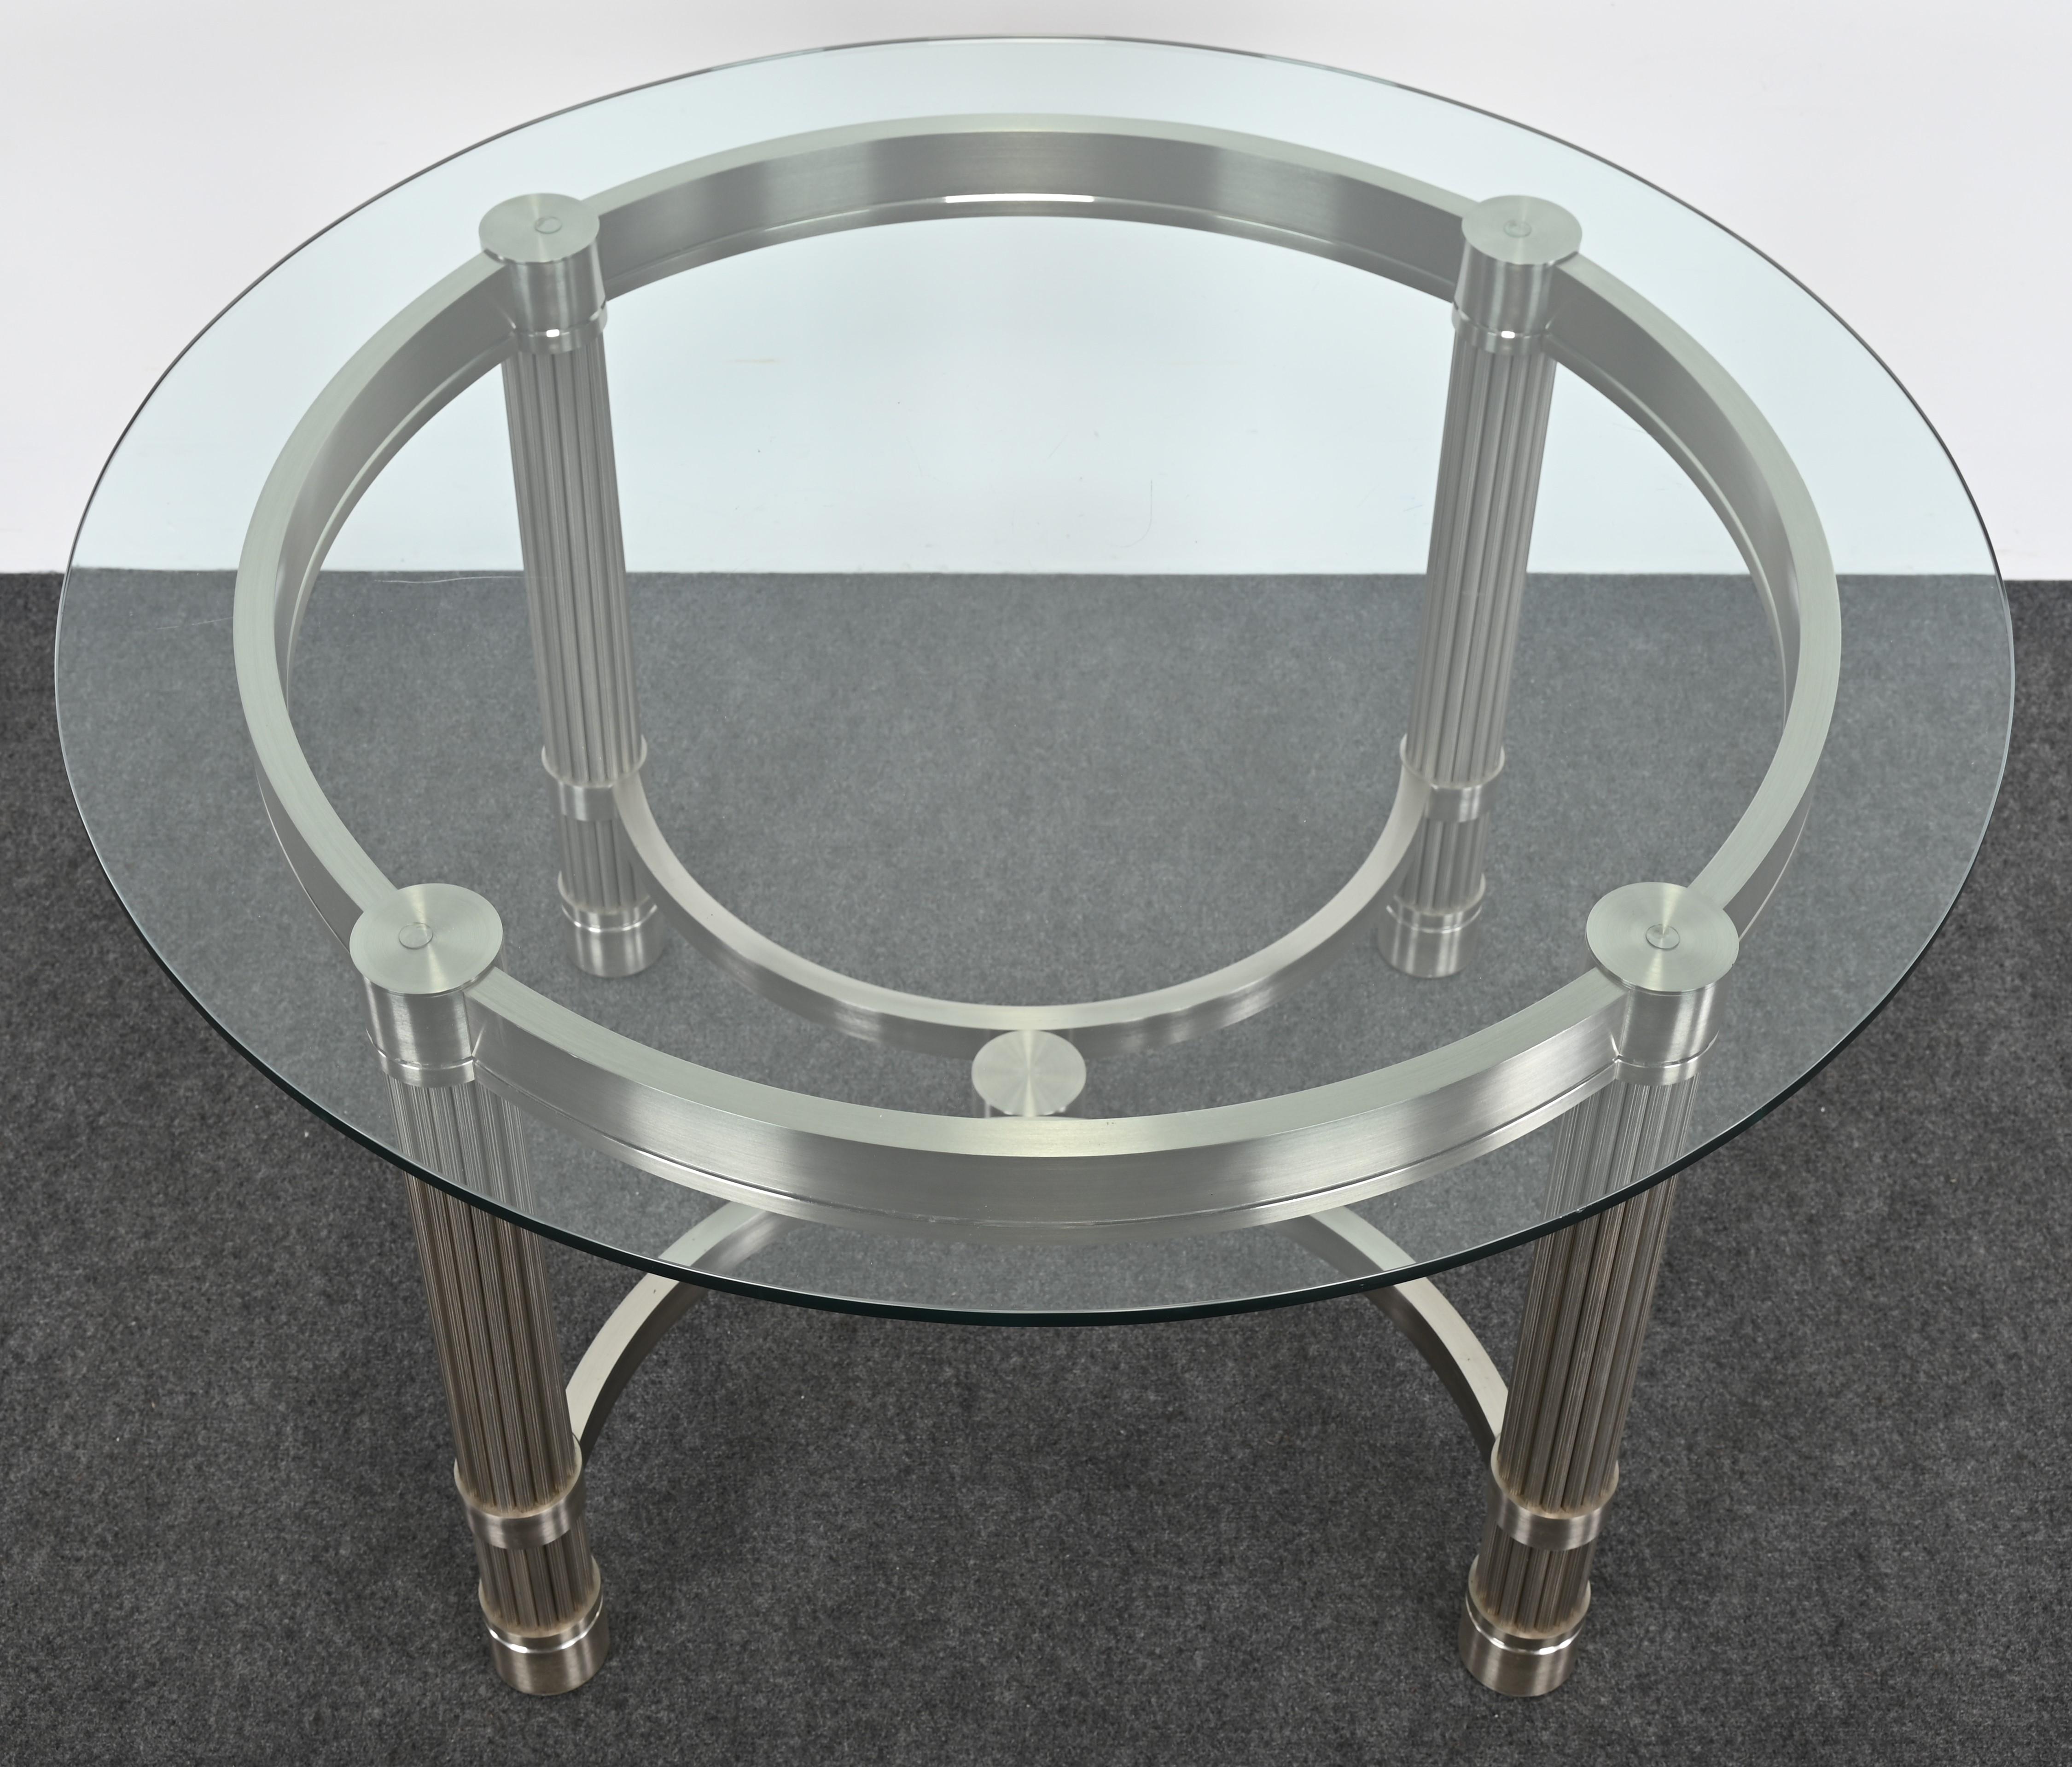 Solid Stainless Steel Center or Dining Table by Ron Seff, 1980s For Sale 4